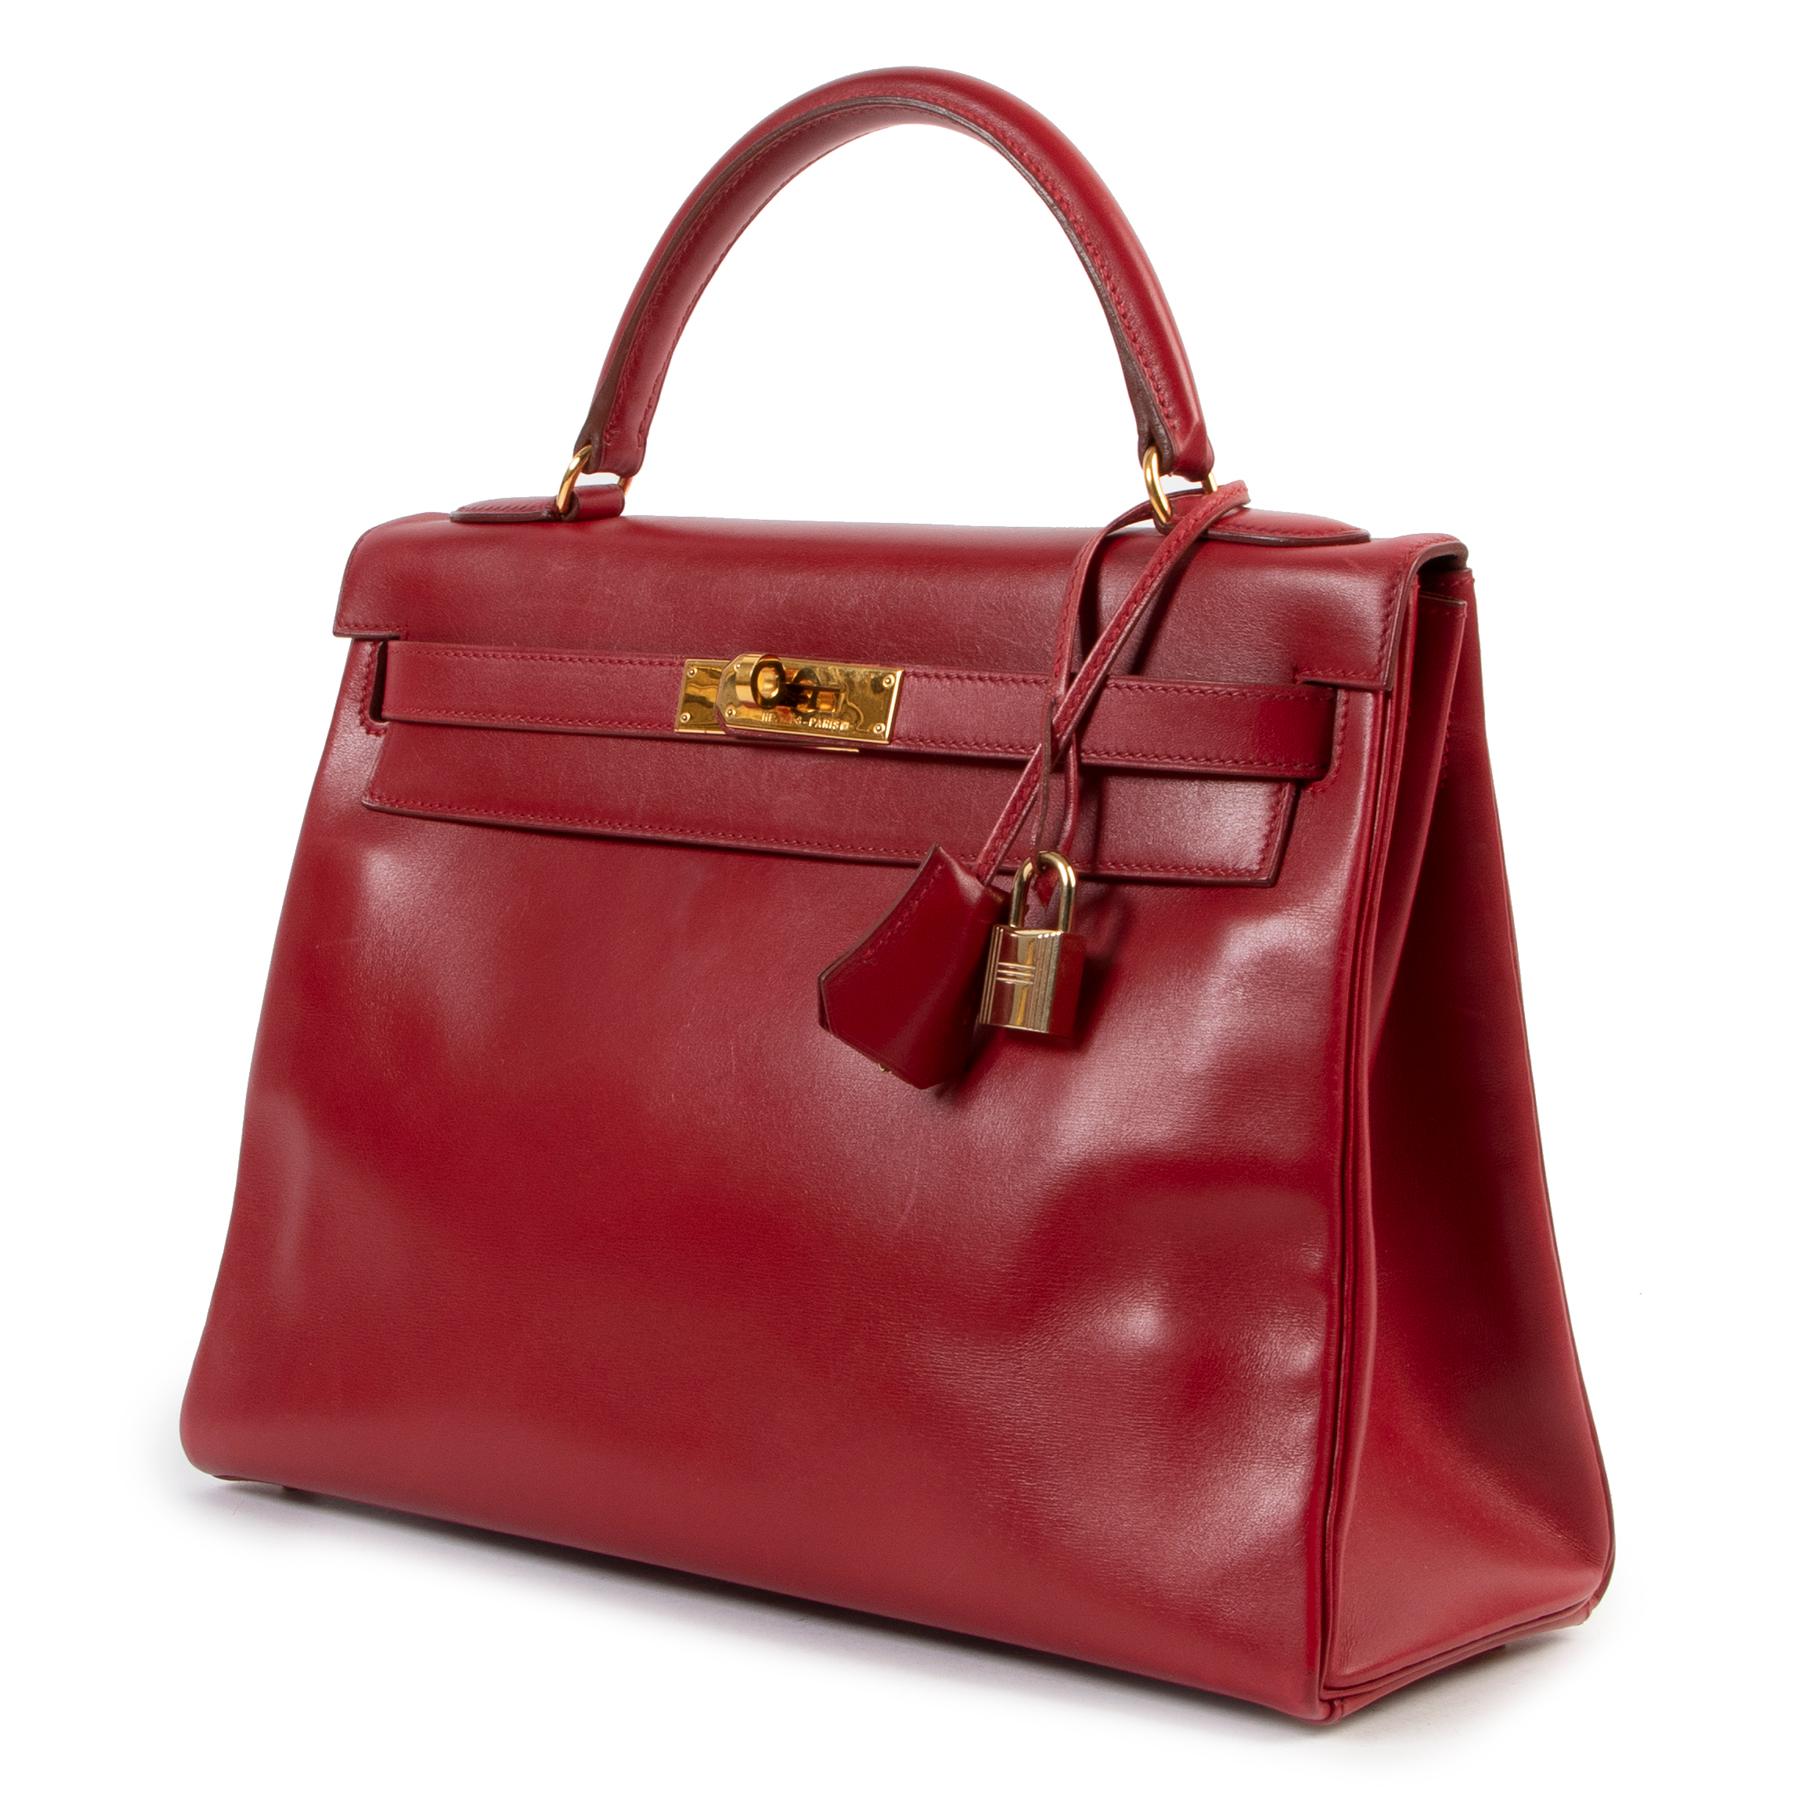 Hermès Kelly Retourne 32 Smooth Red Veau Tadelakt Calfskin GHW

Elegance at it's best! 

This Hermès Kelly bag is beyond gorgeous. The smooth red leather is energetic yet elegant and makes this Hermès Kelly a real showstopper.

The Kelly bag is